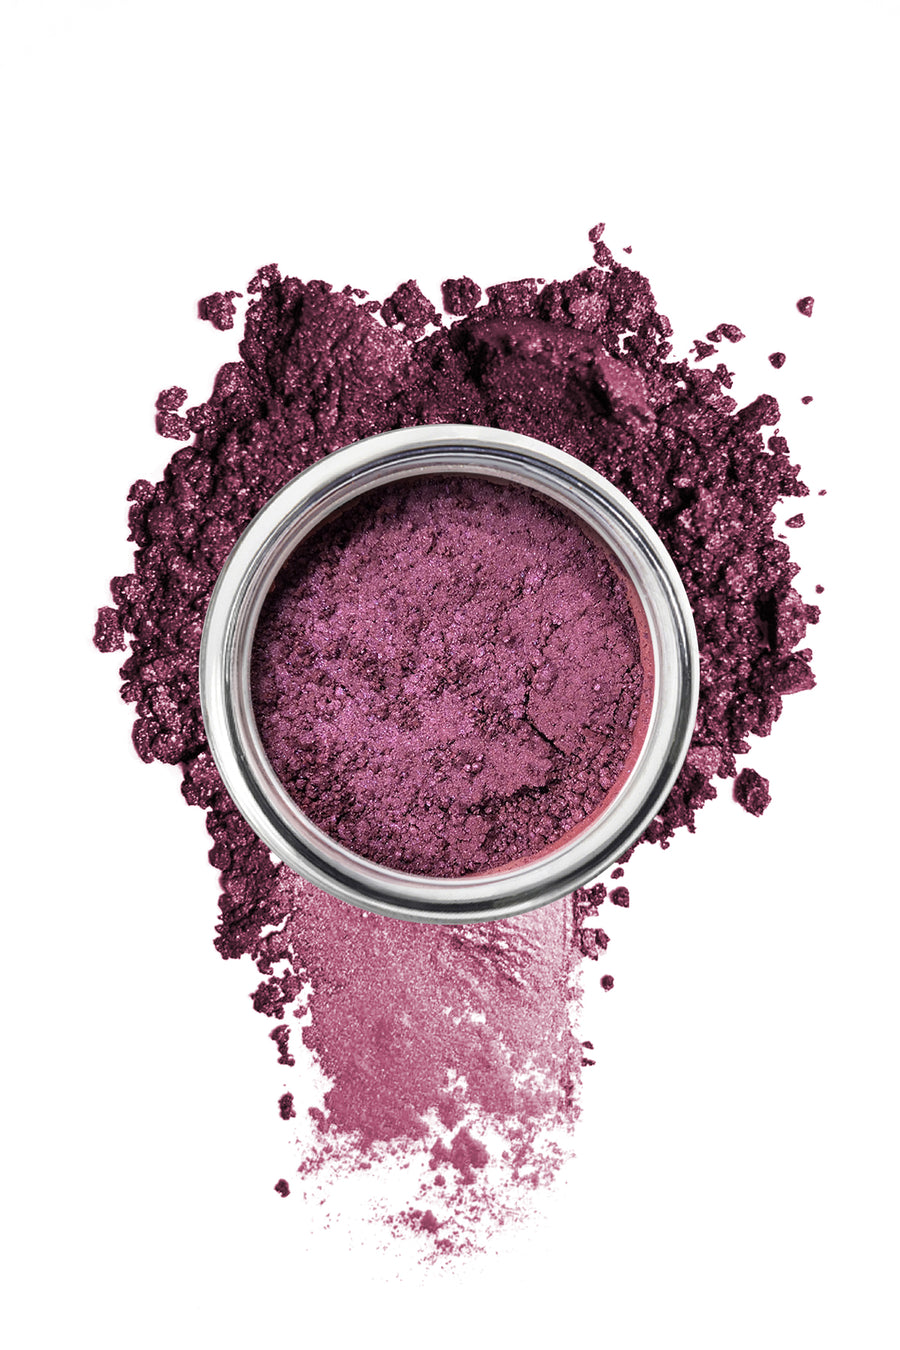 Shimmer Eyeshadow #52 - Lilac - Blend Mineral Cosmetics